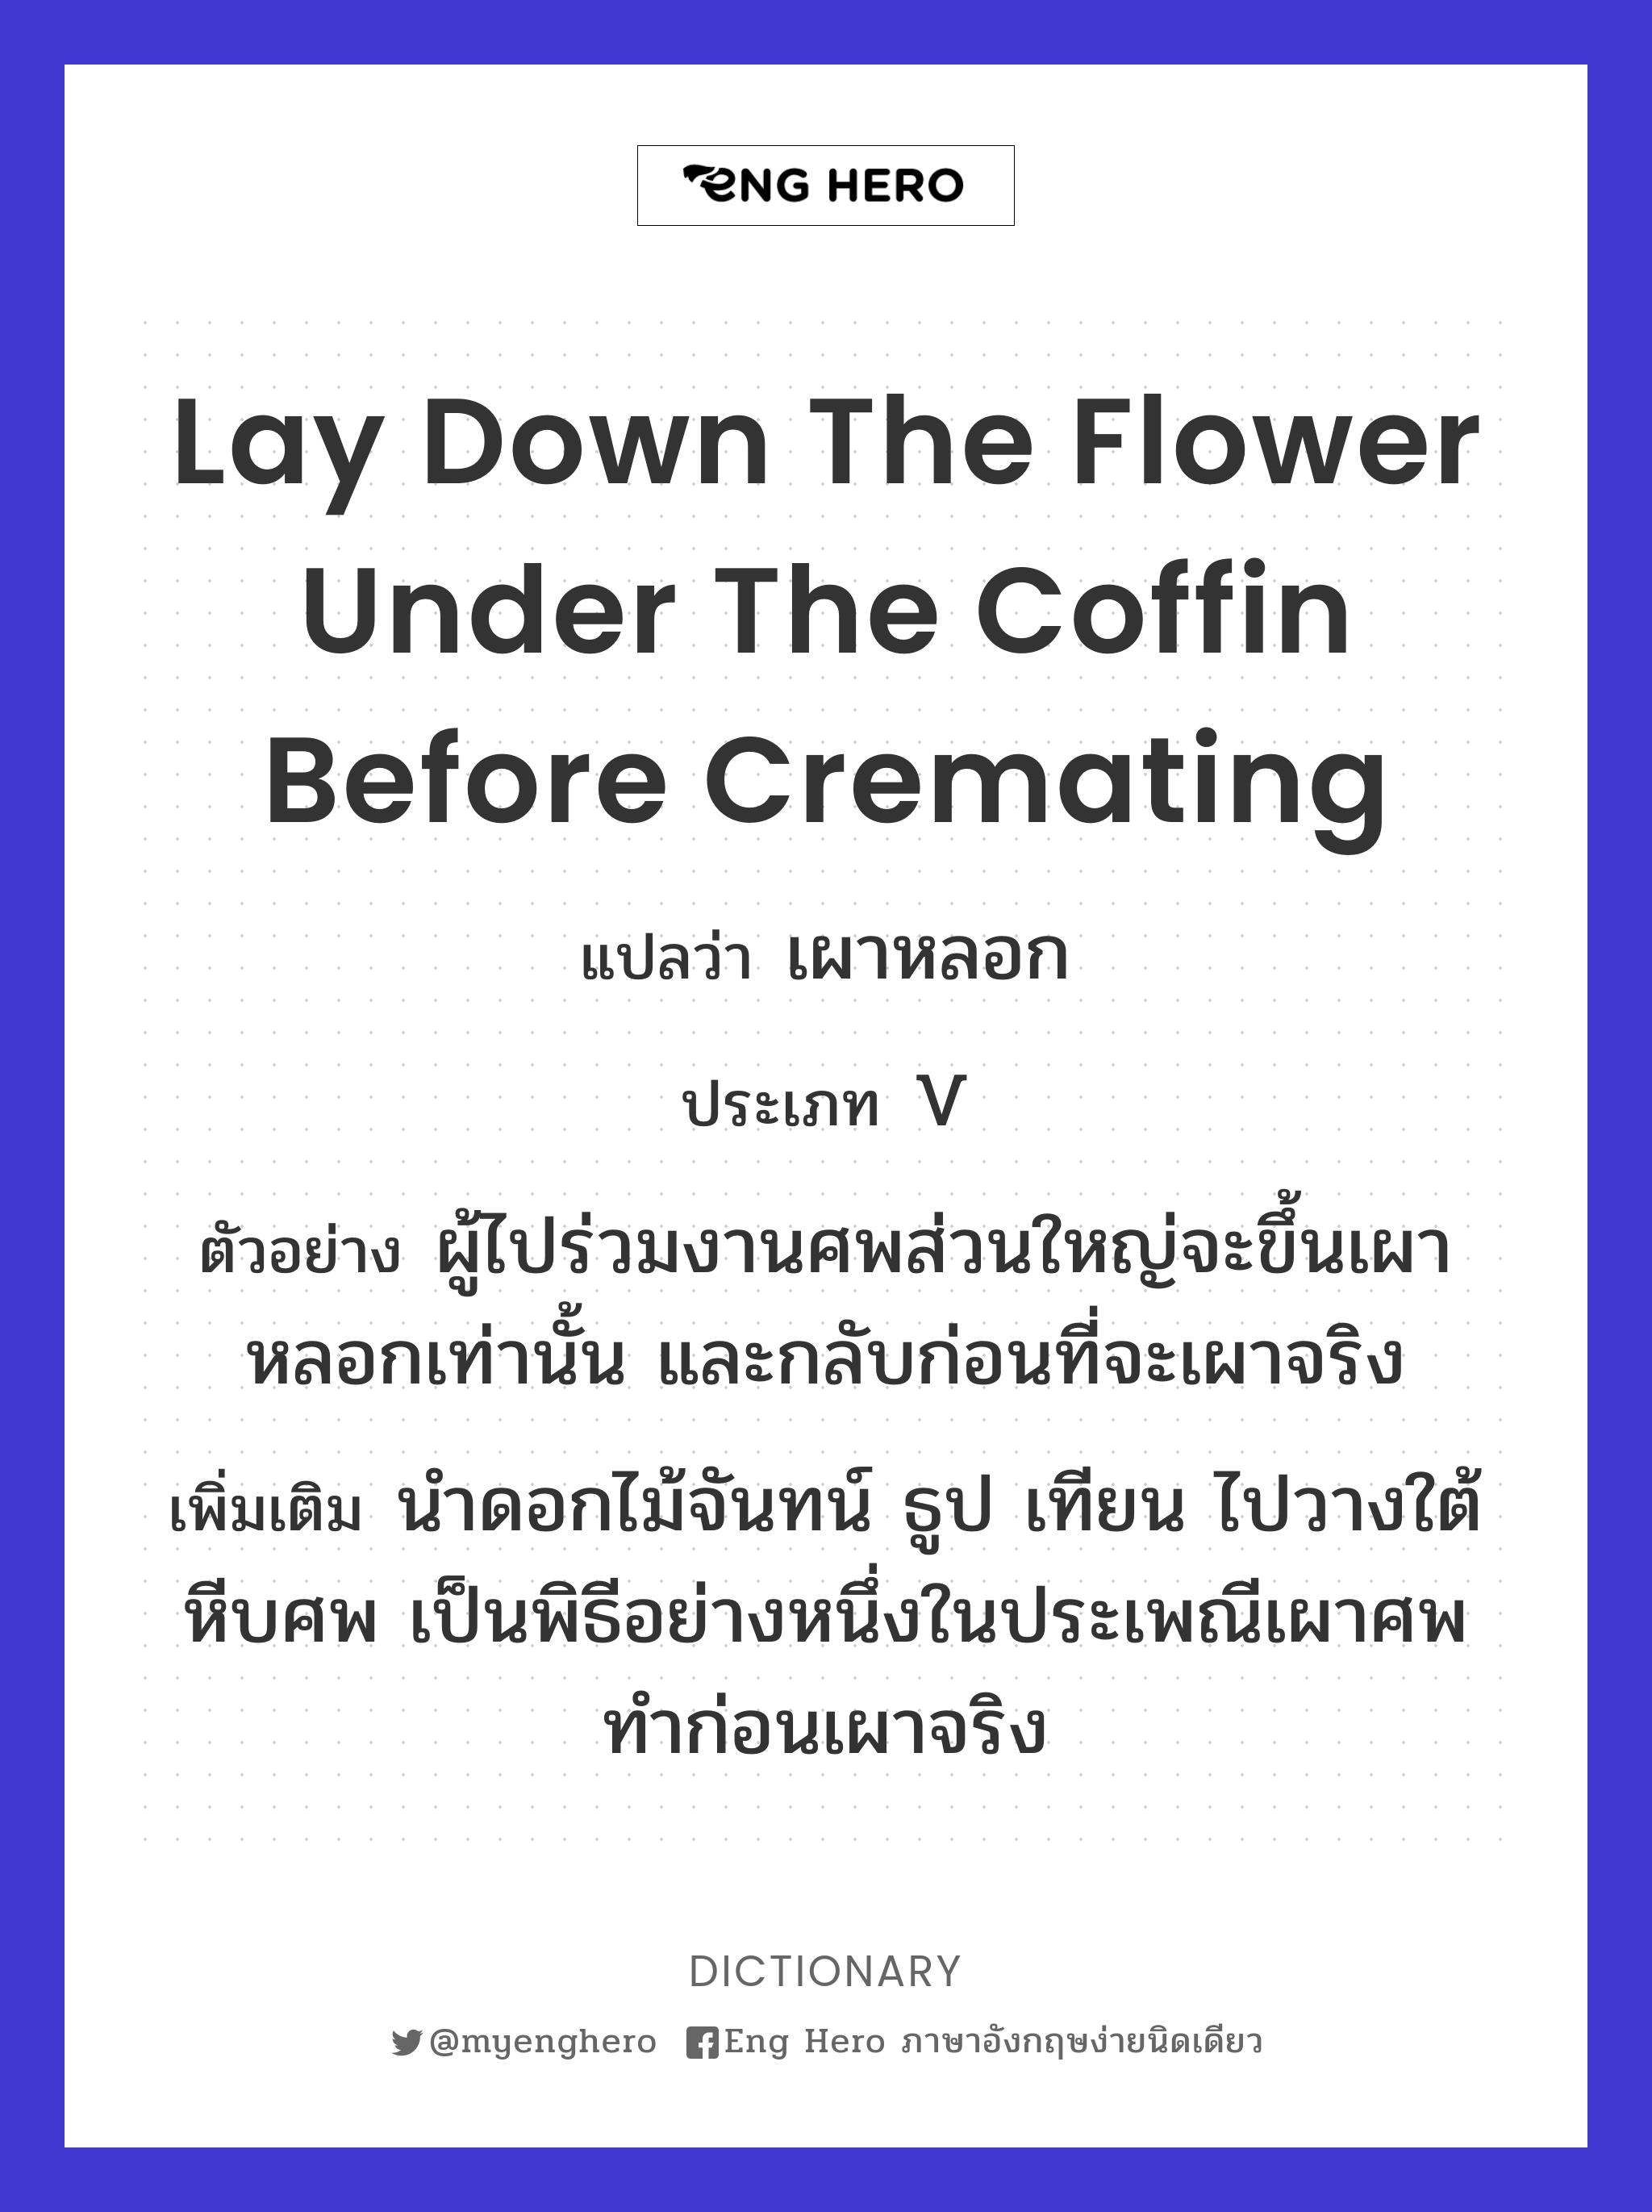 lay down the flower under the coffin before cremating